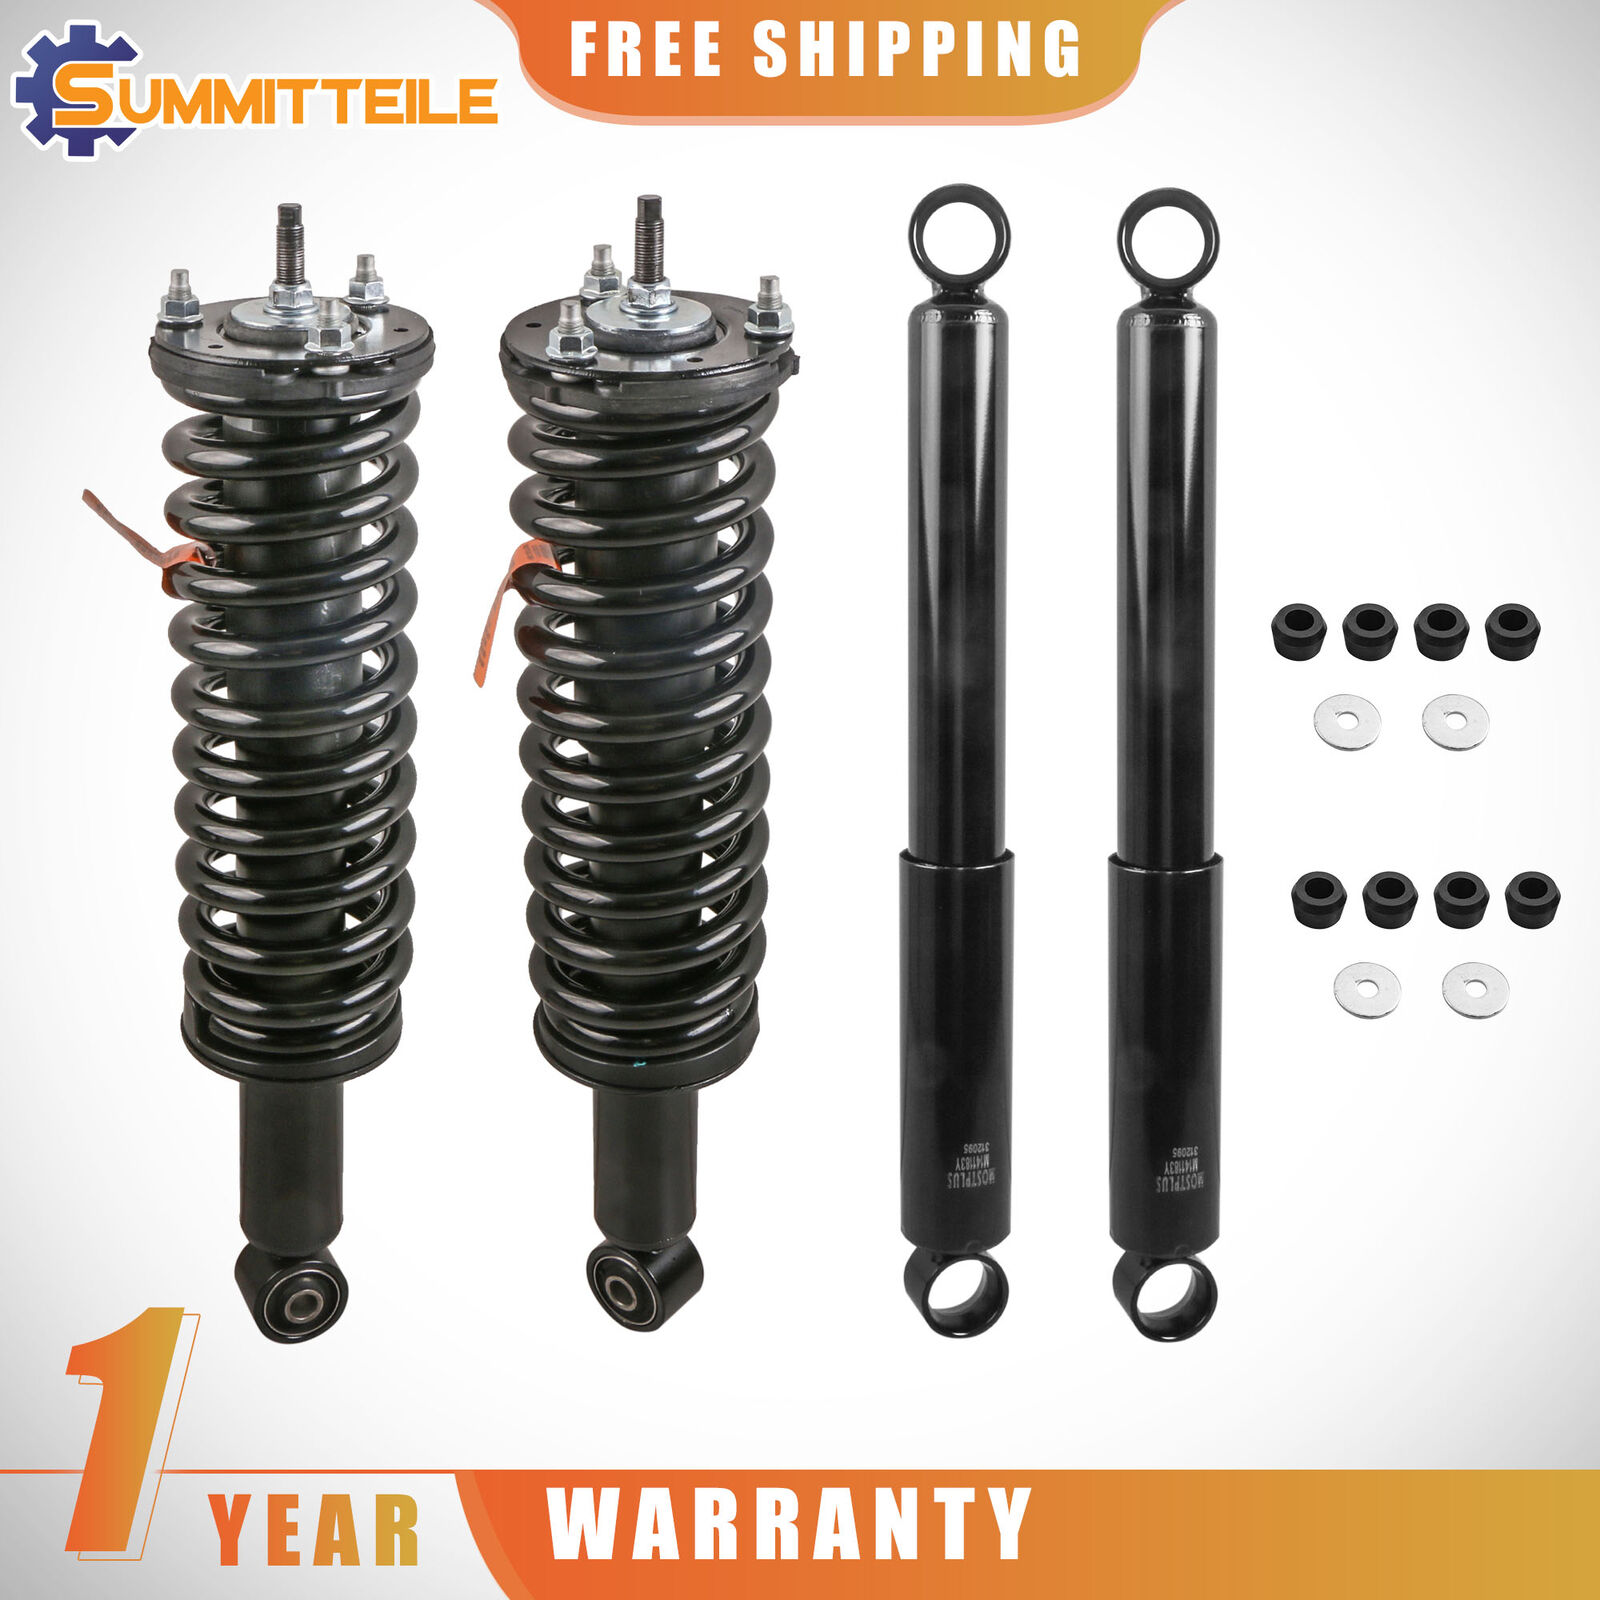 4X Front Complete Struts Rear Shocks For 1998-2004 Toyota Tacoma 171352L 171352R